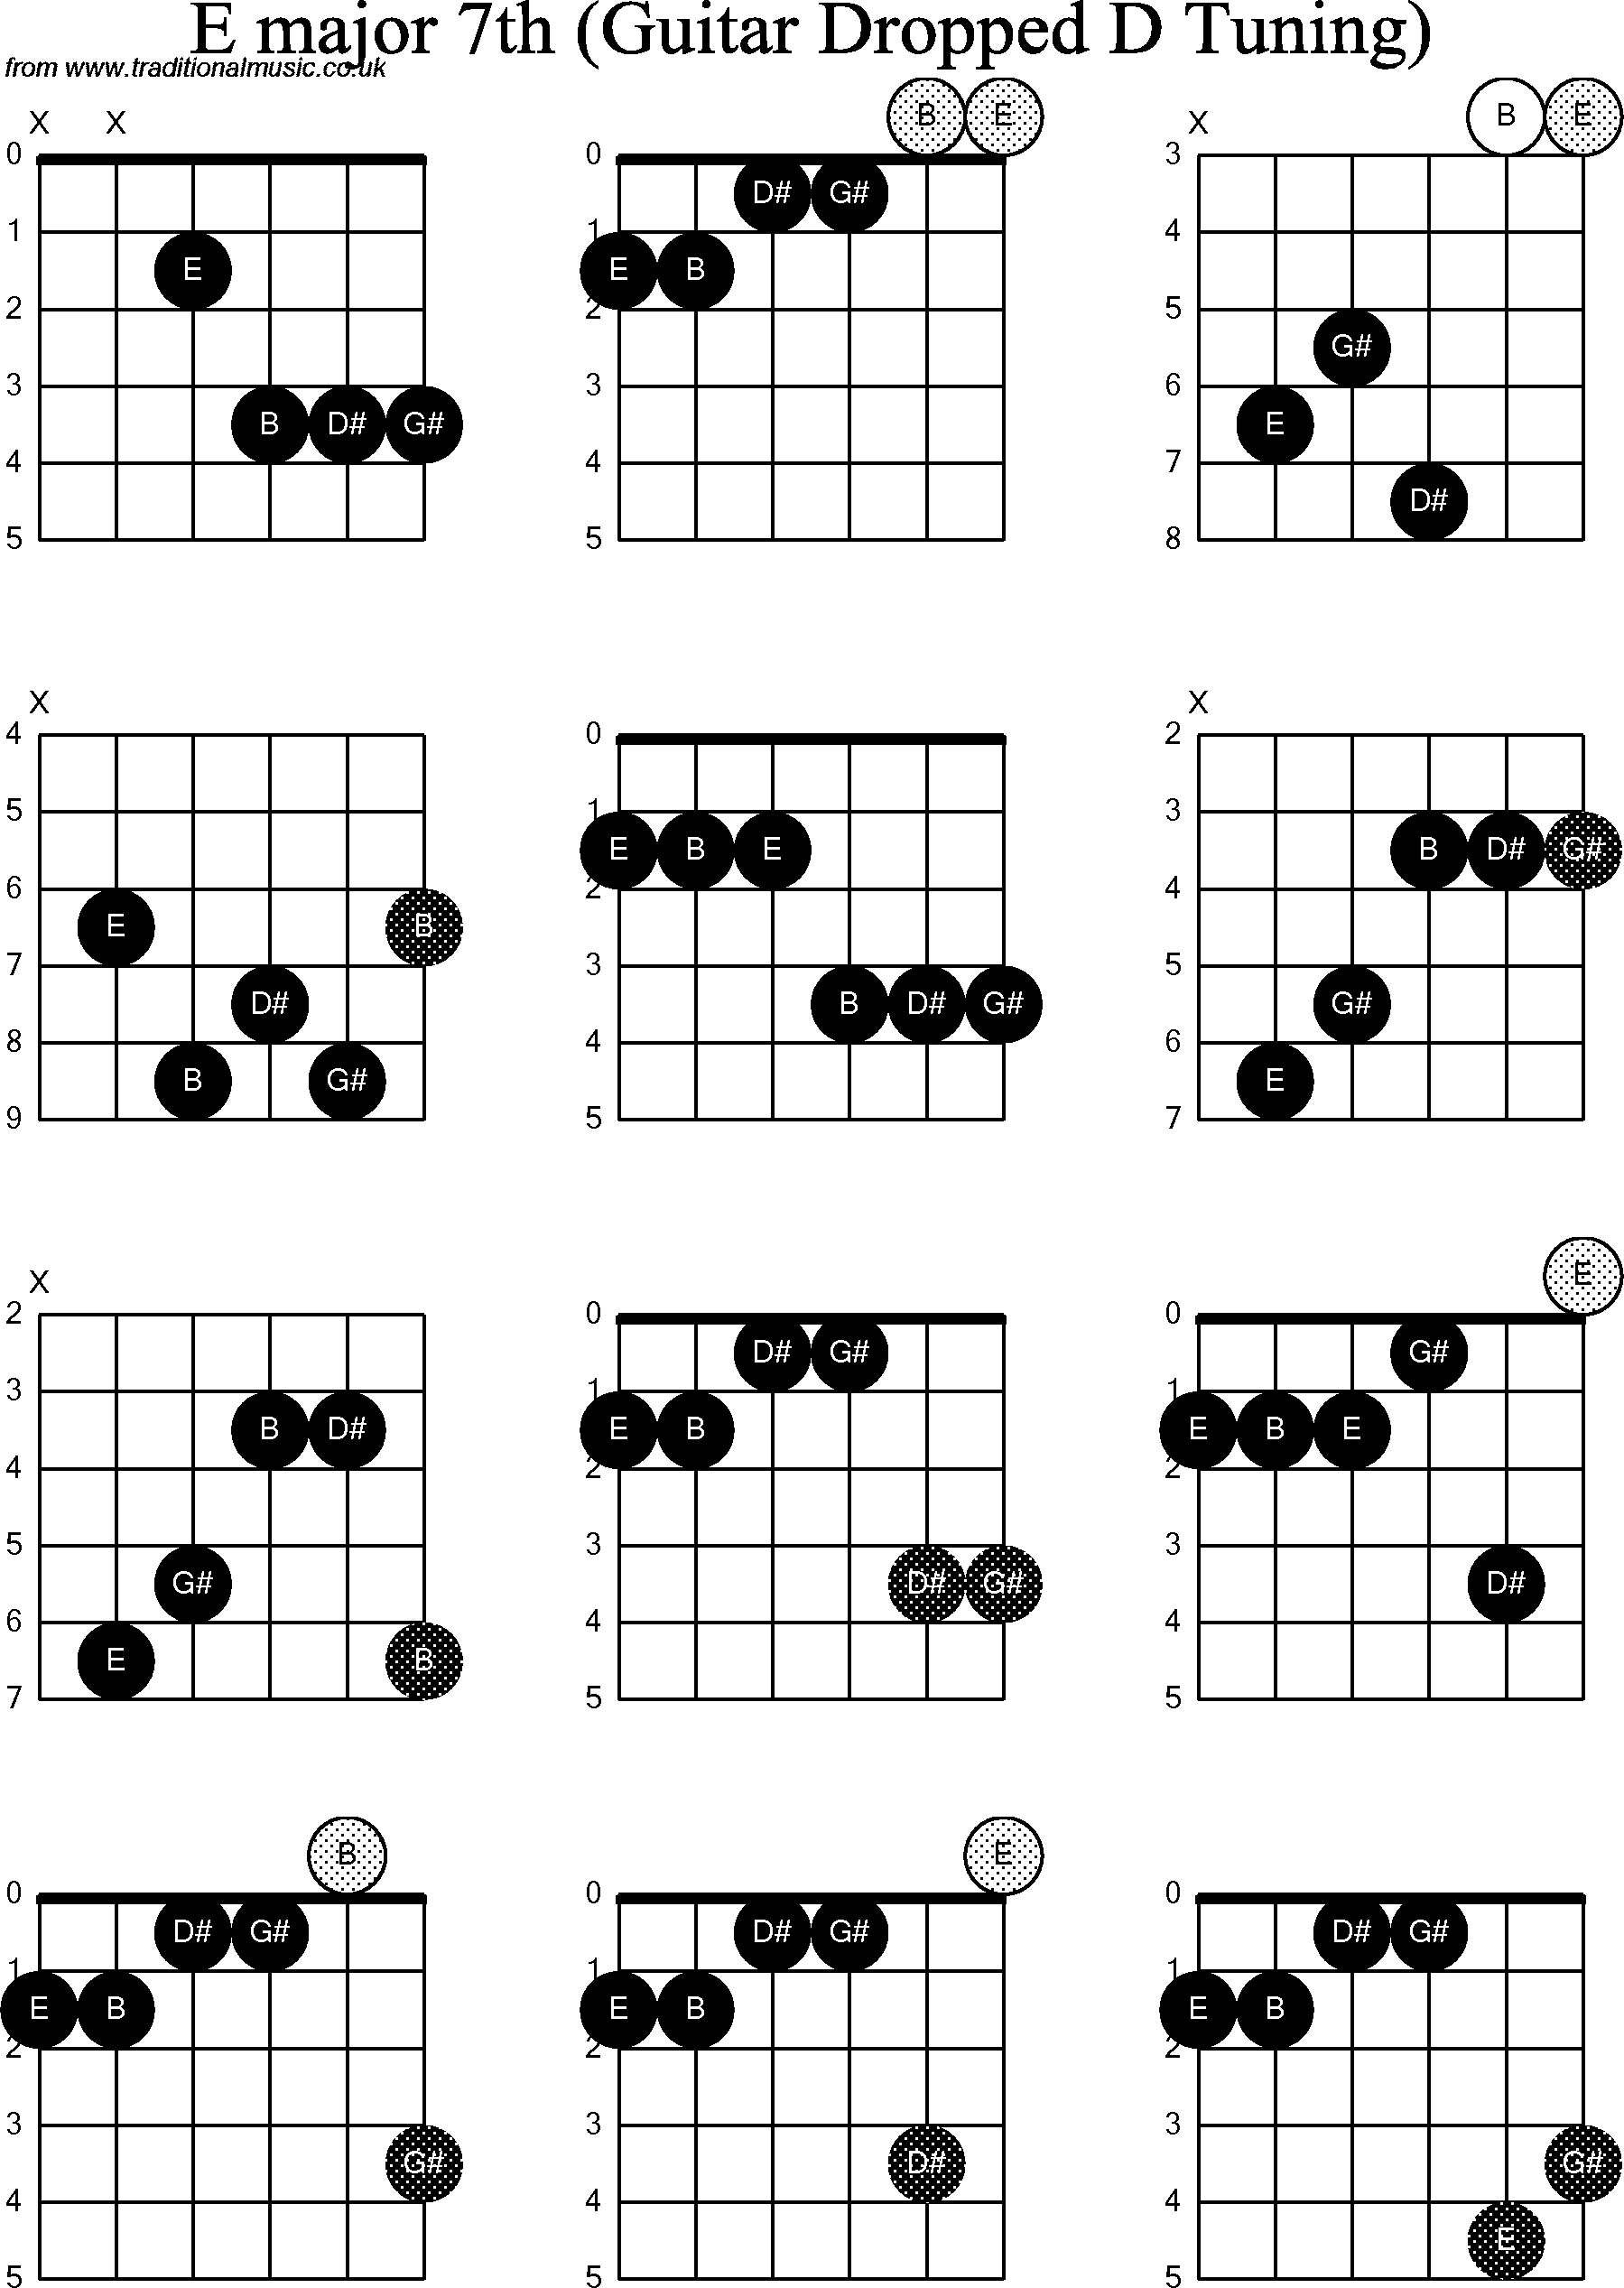 Chord diagrams for dropped D Guitar(DADGBE), E Major7th